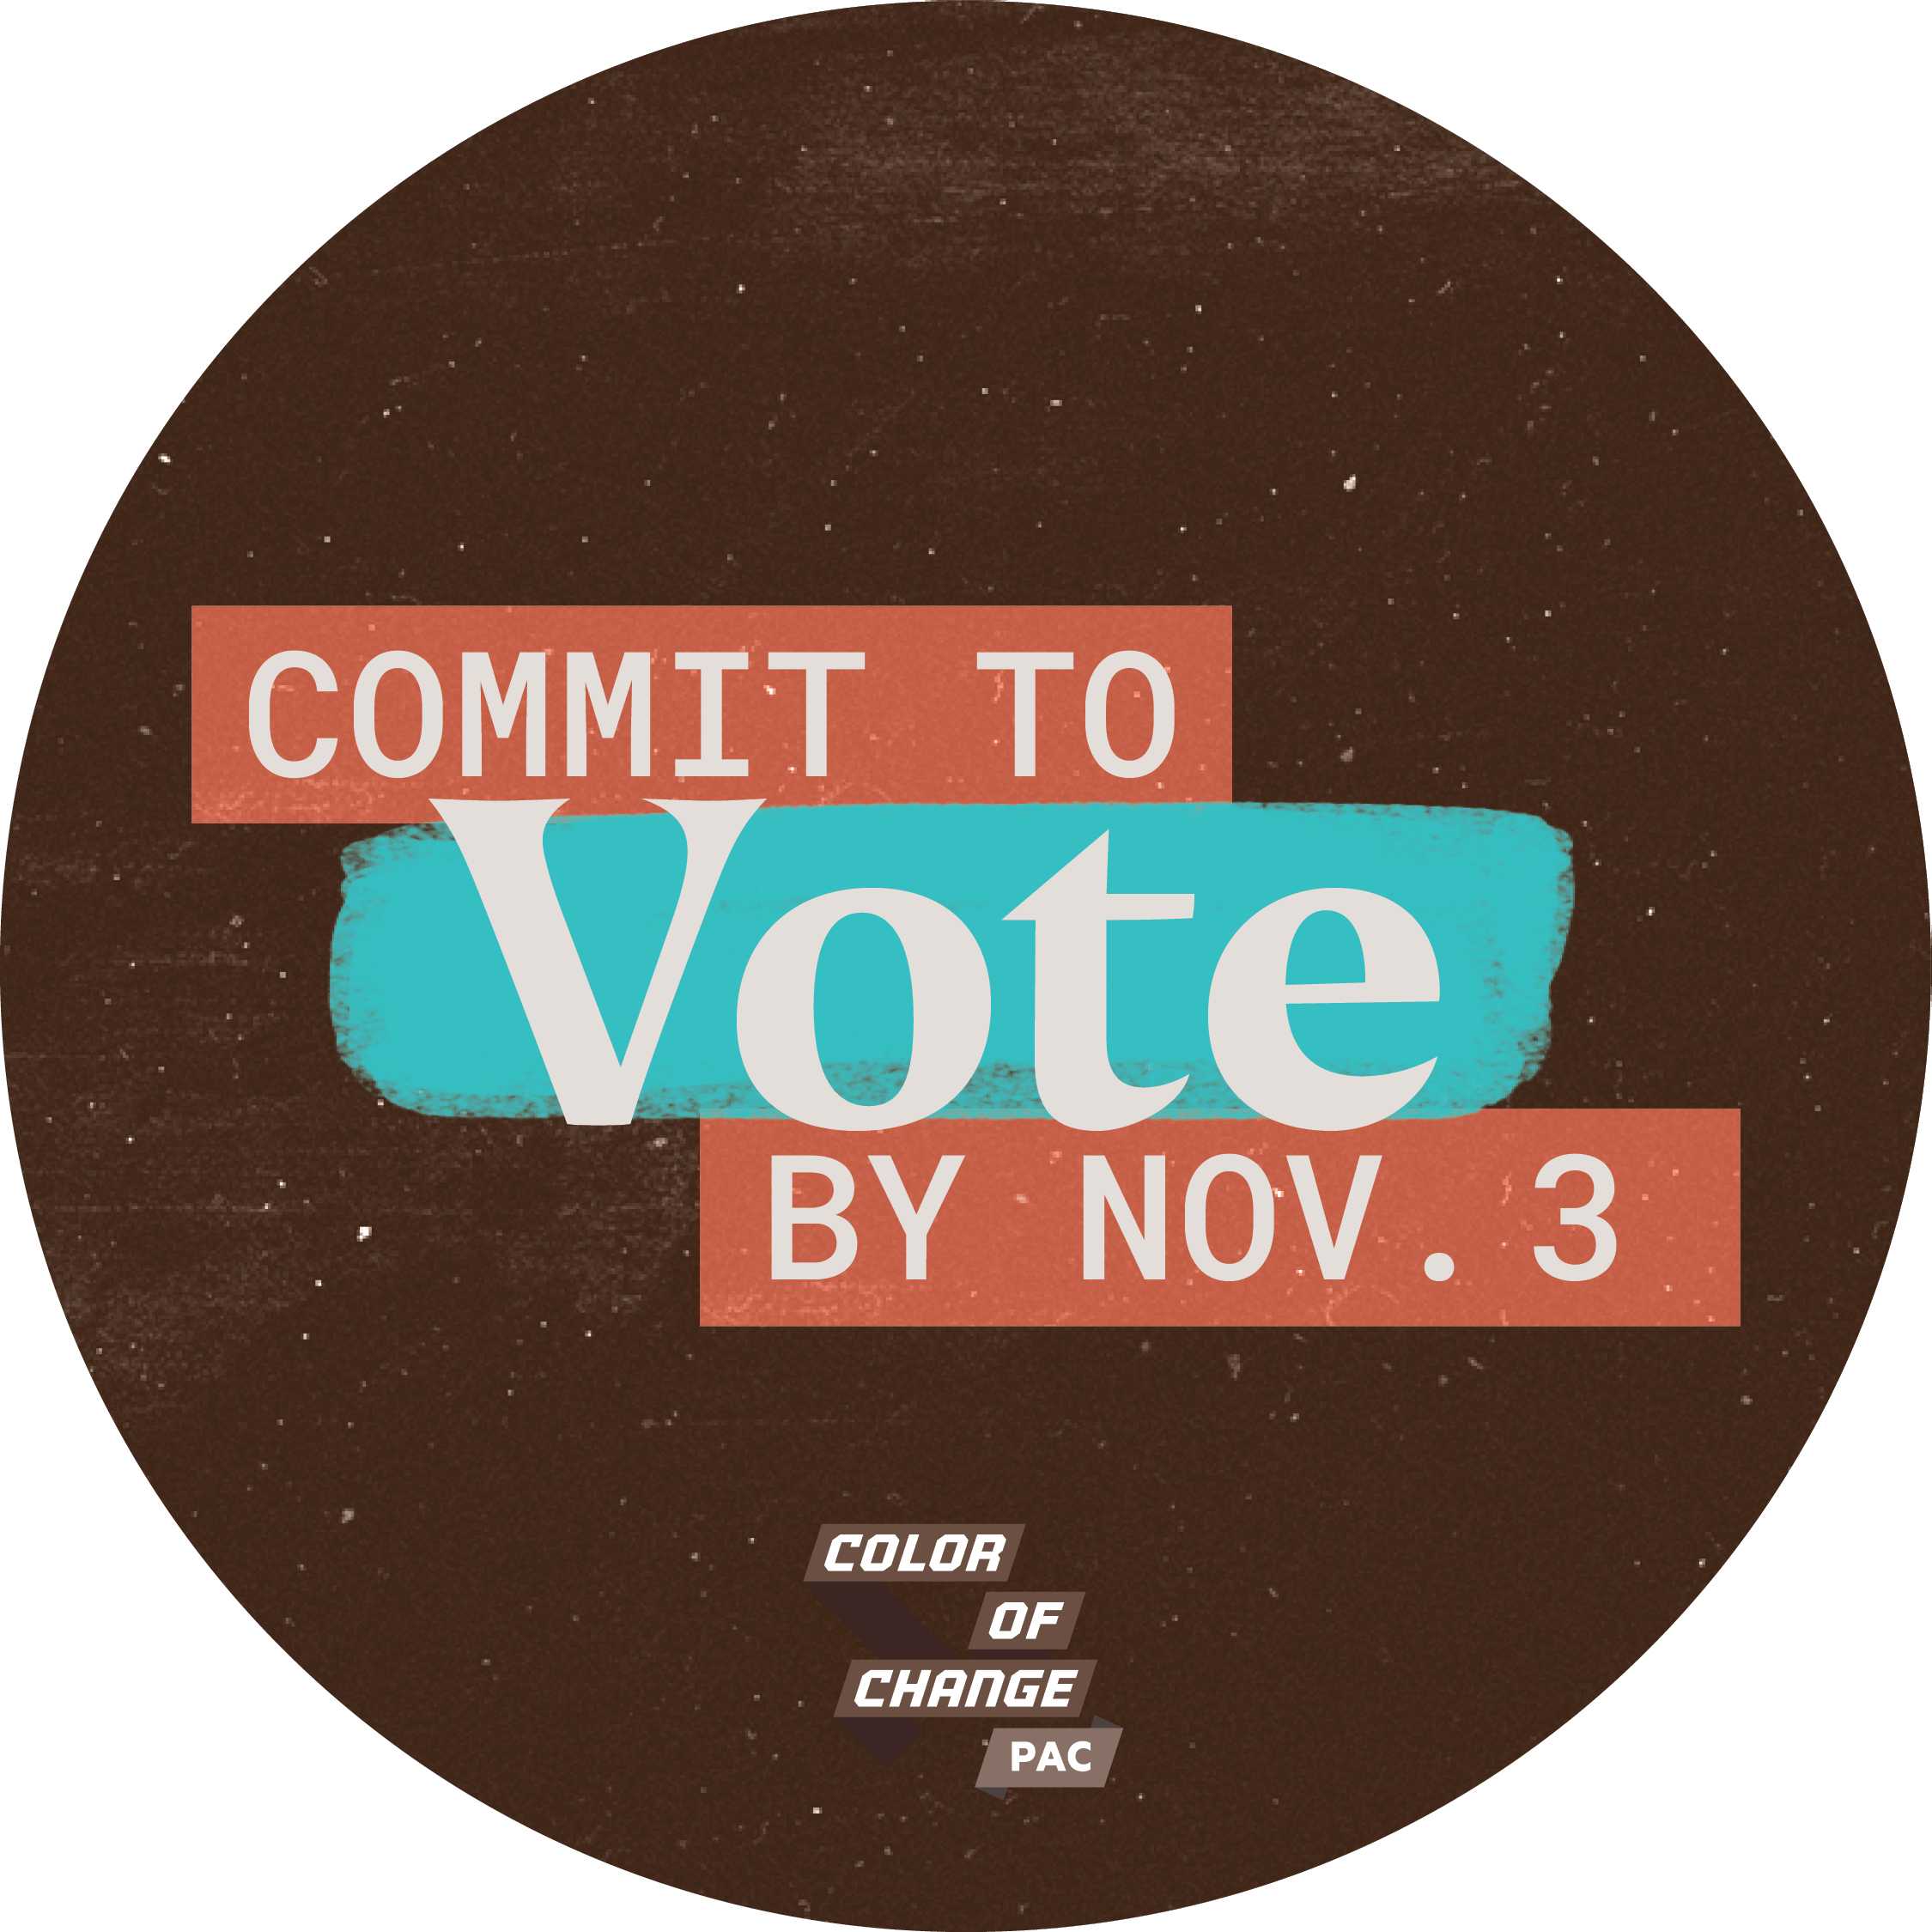 Commit to vote by Nov. 3